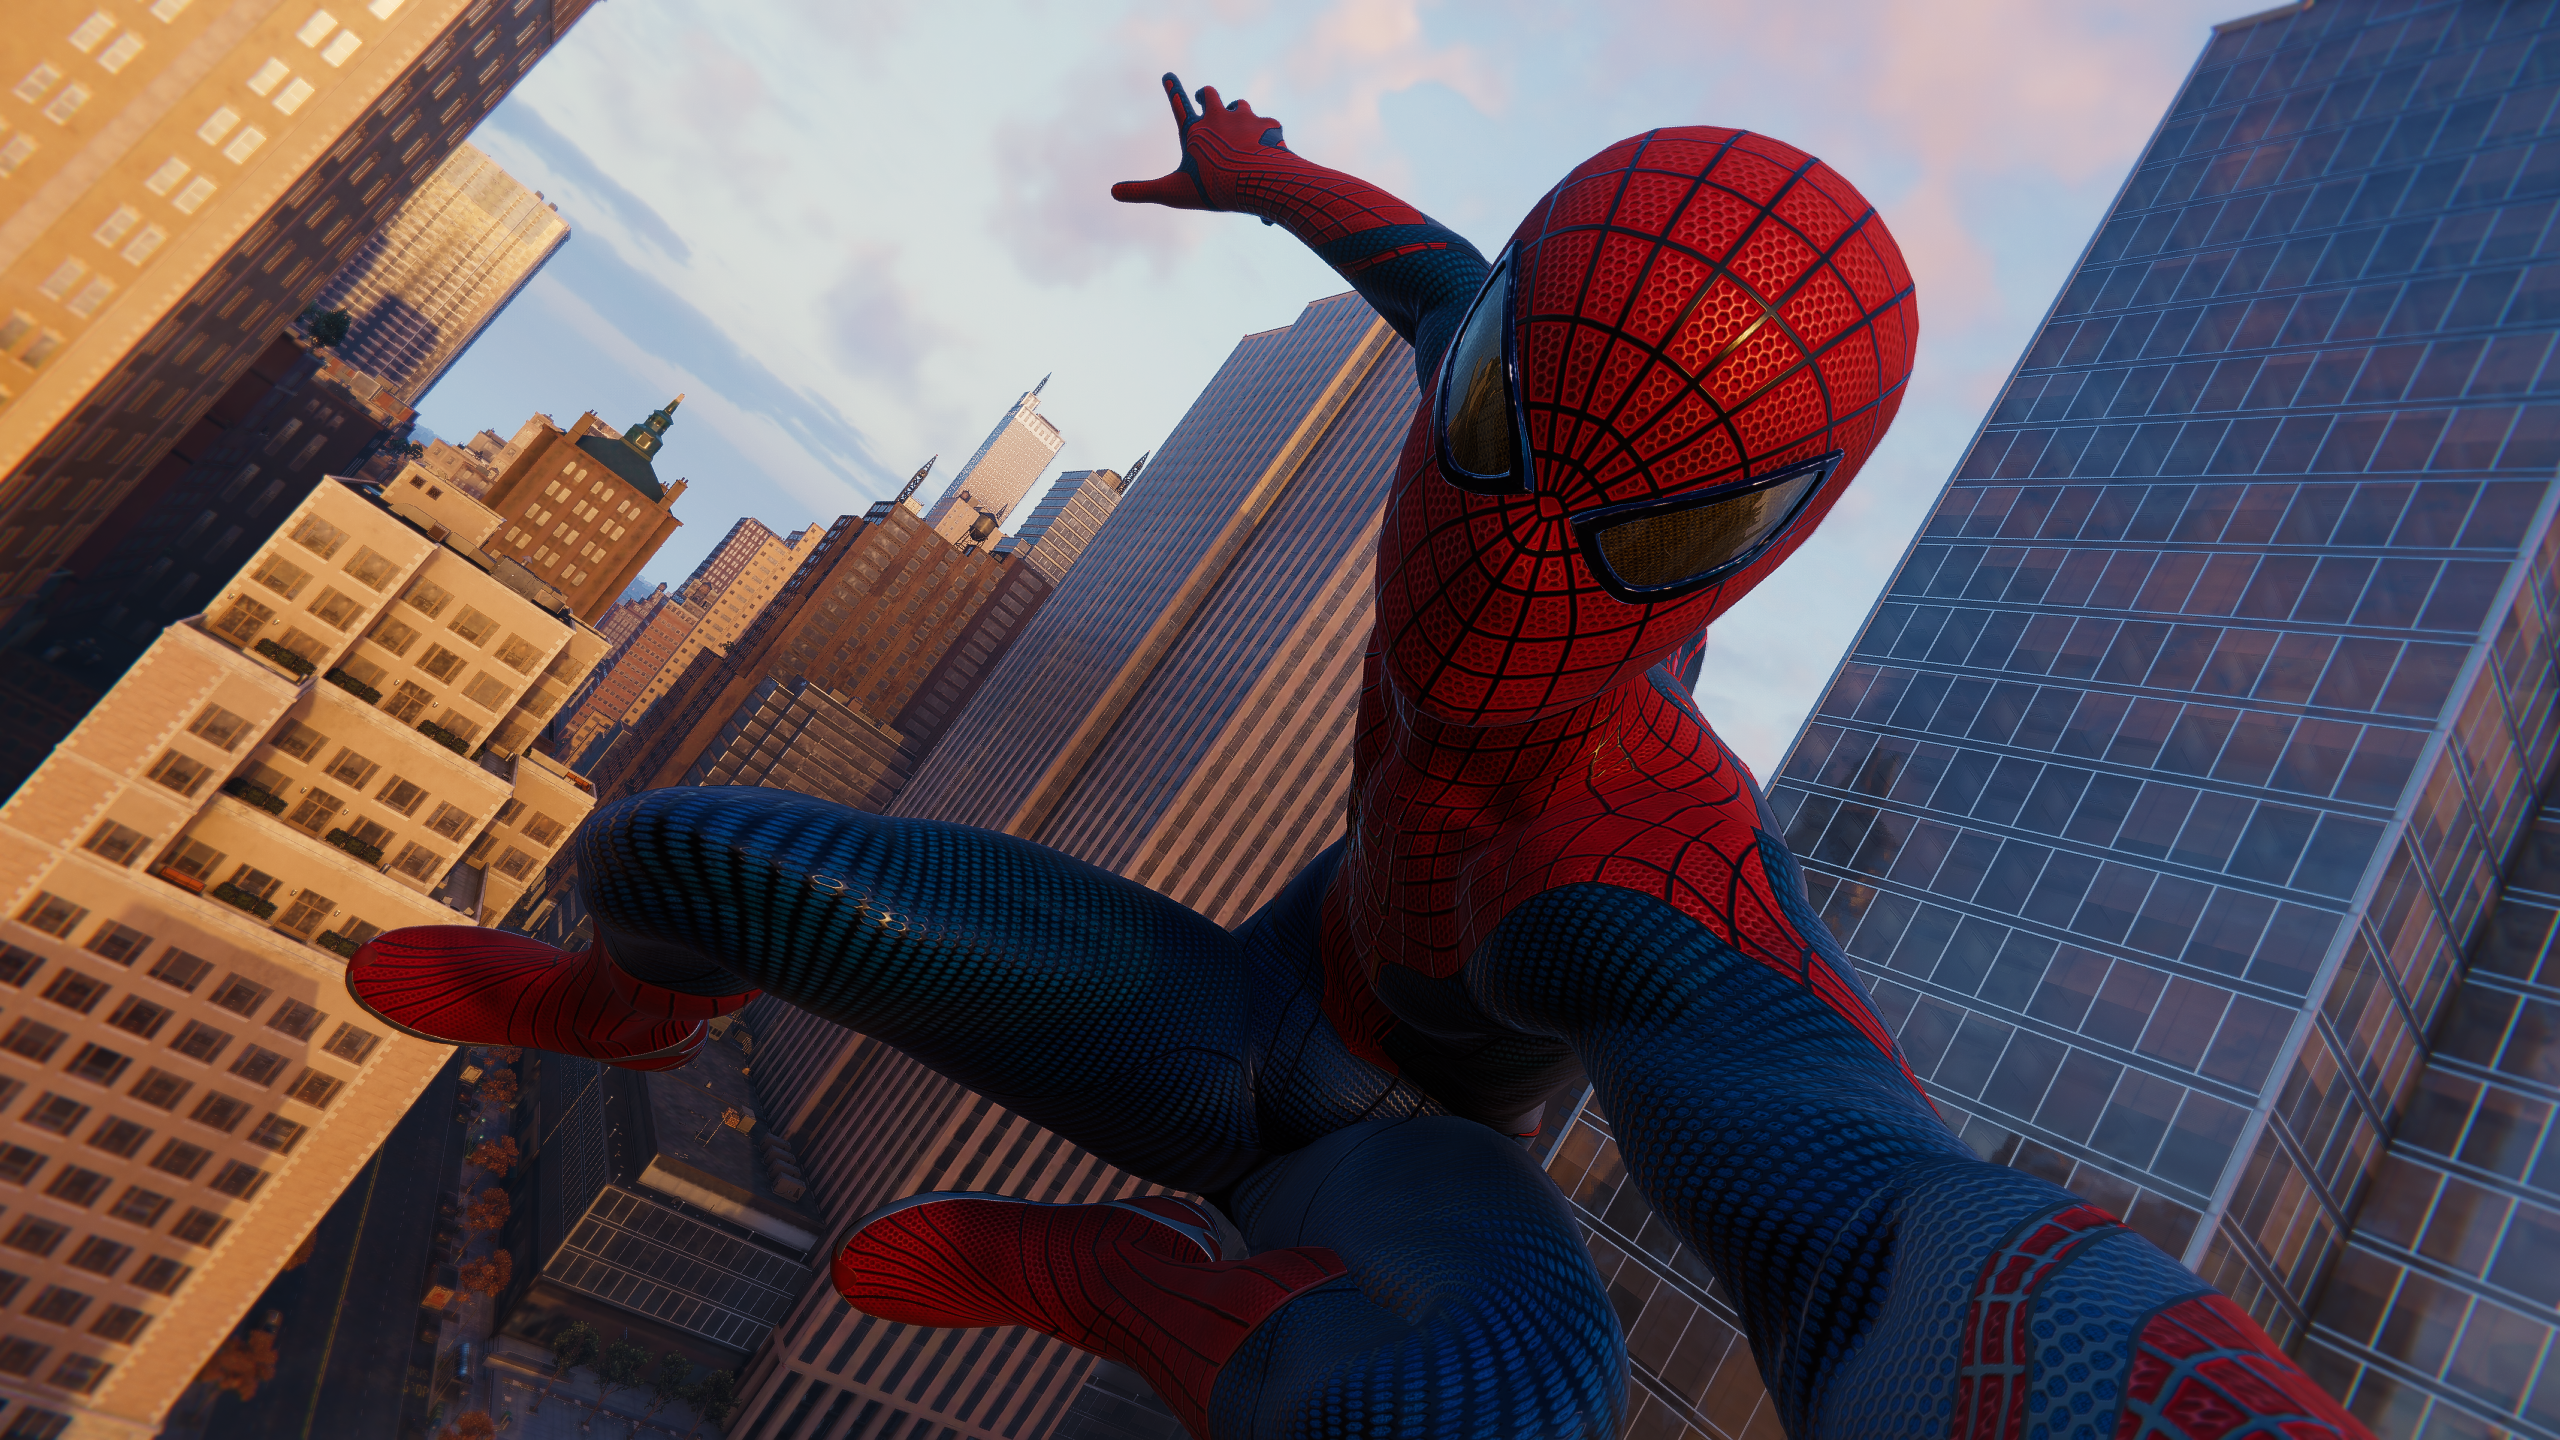 Spider-Man Remastered for PS5 changes a lot, including Peter